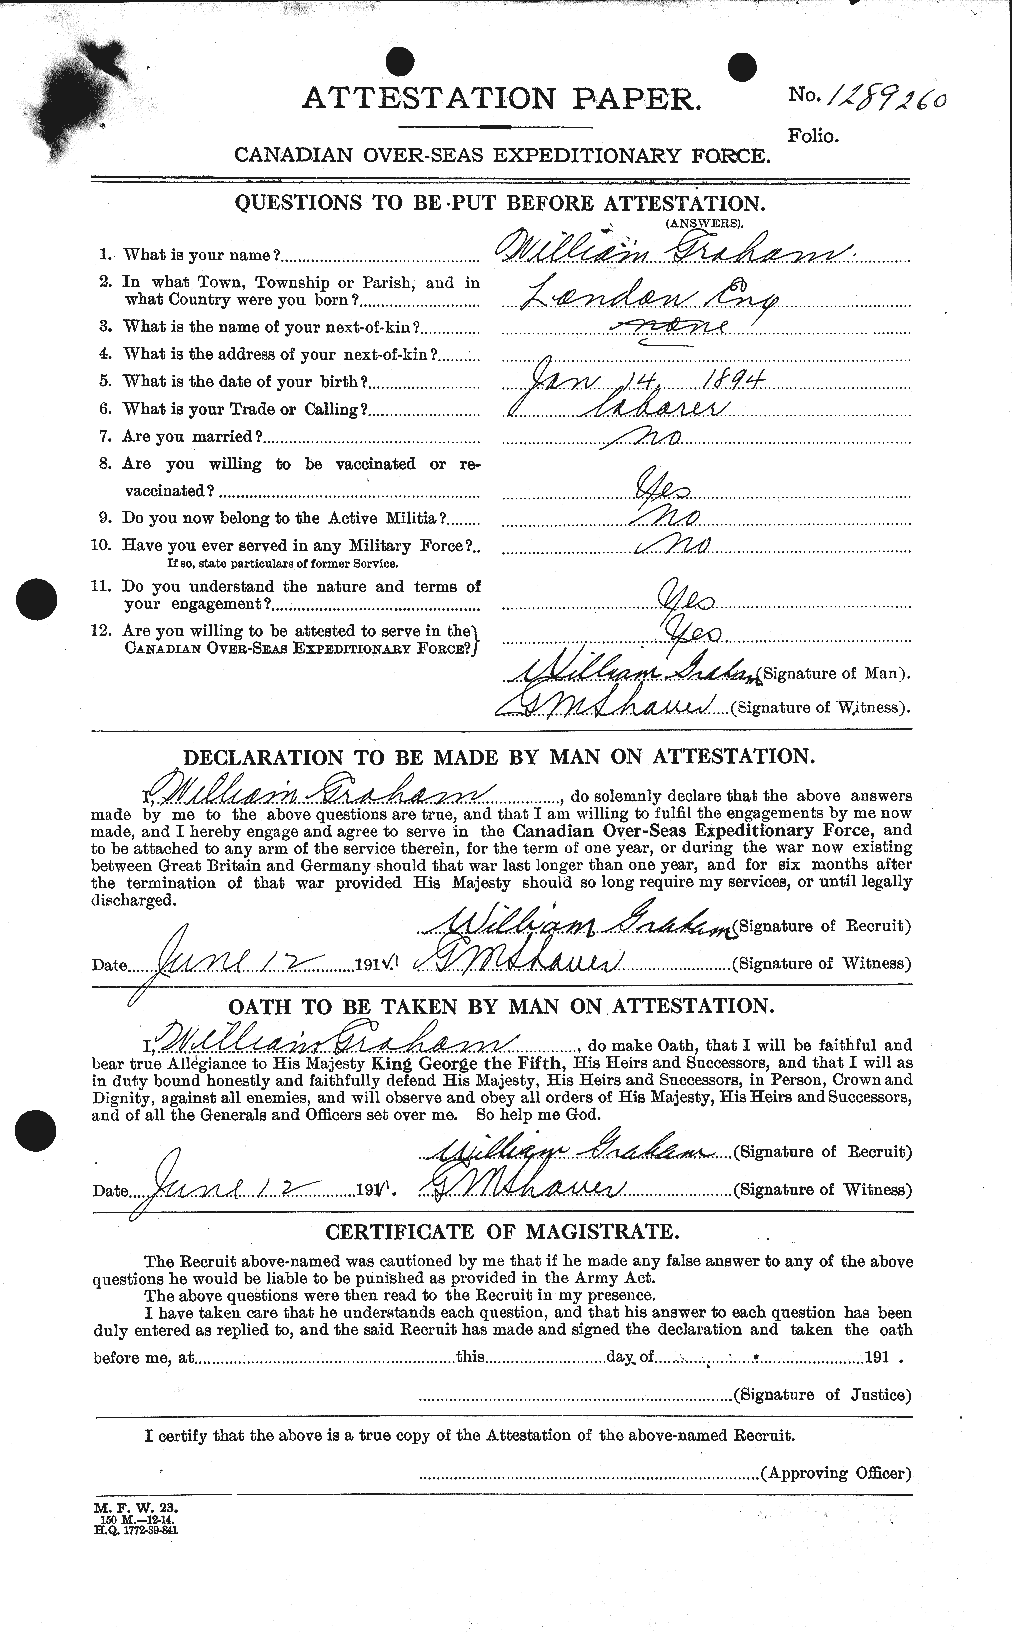 Personnel Records of the First World War - CEF 362703a